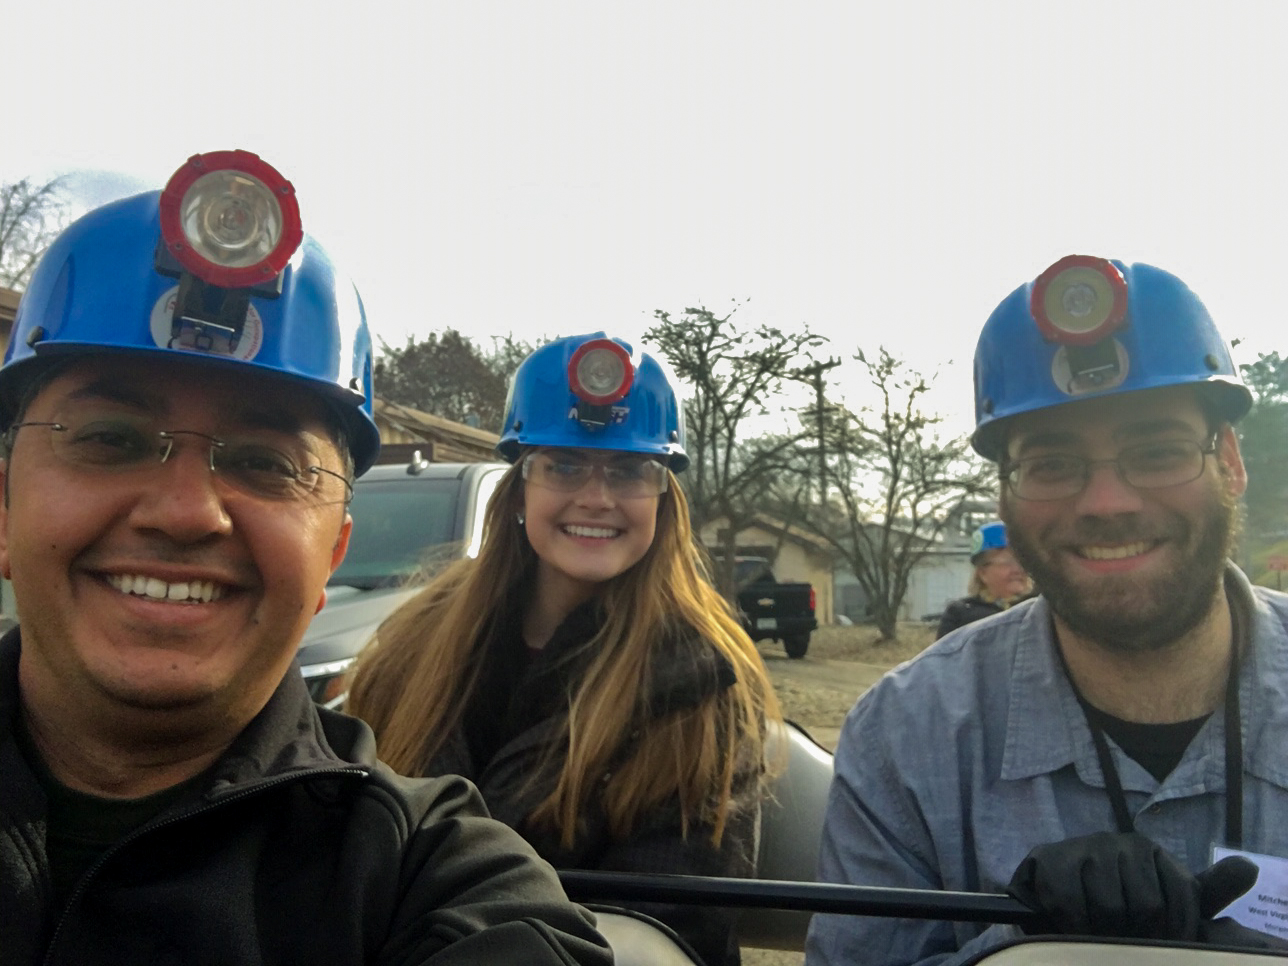 three people wearing safety helmets with lights